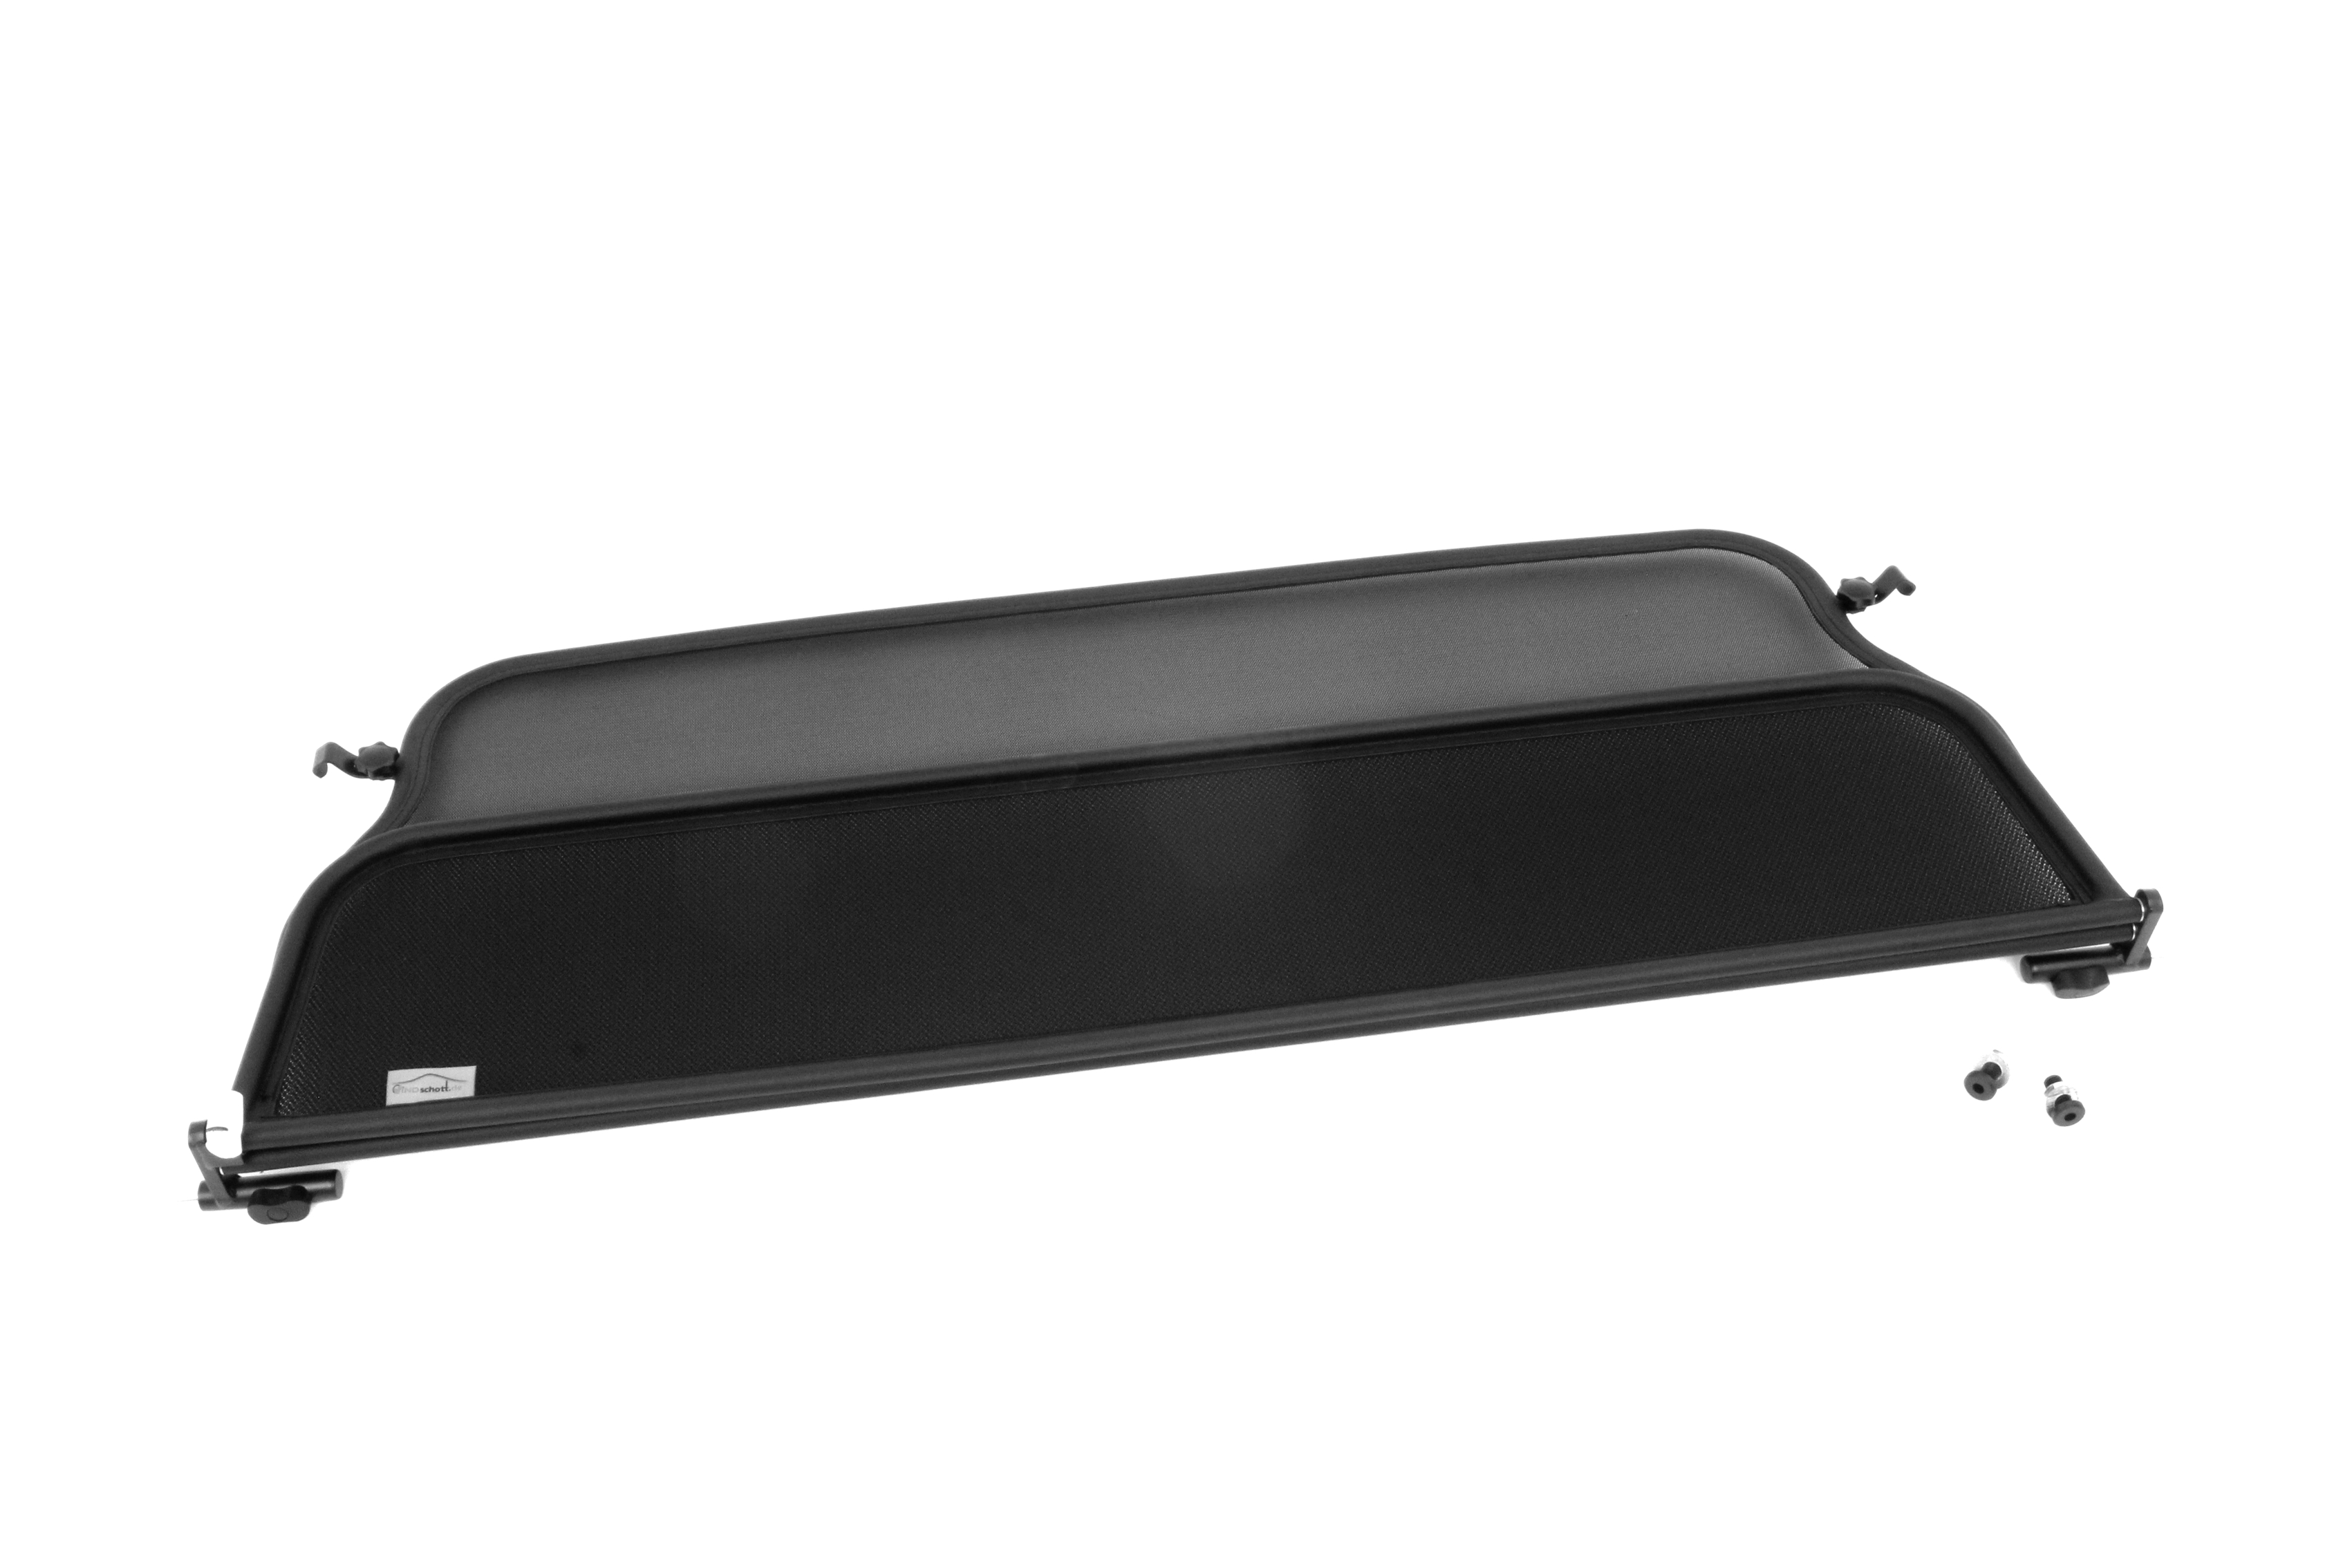 AIRAX wind deflector for Chrysler Sebring - Stratus quick release 